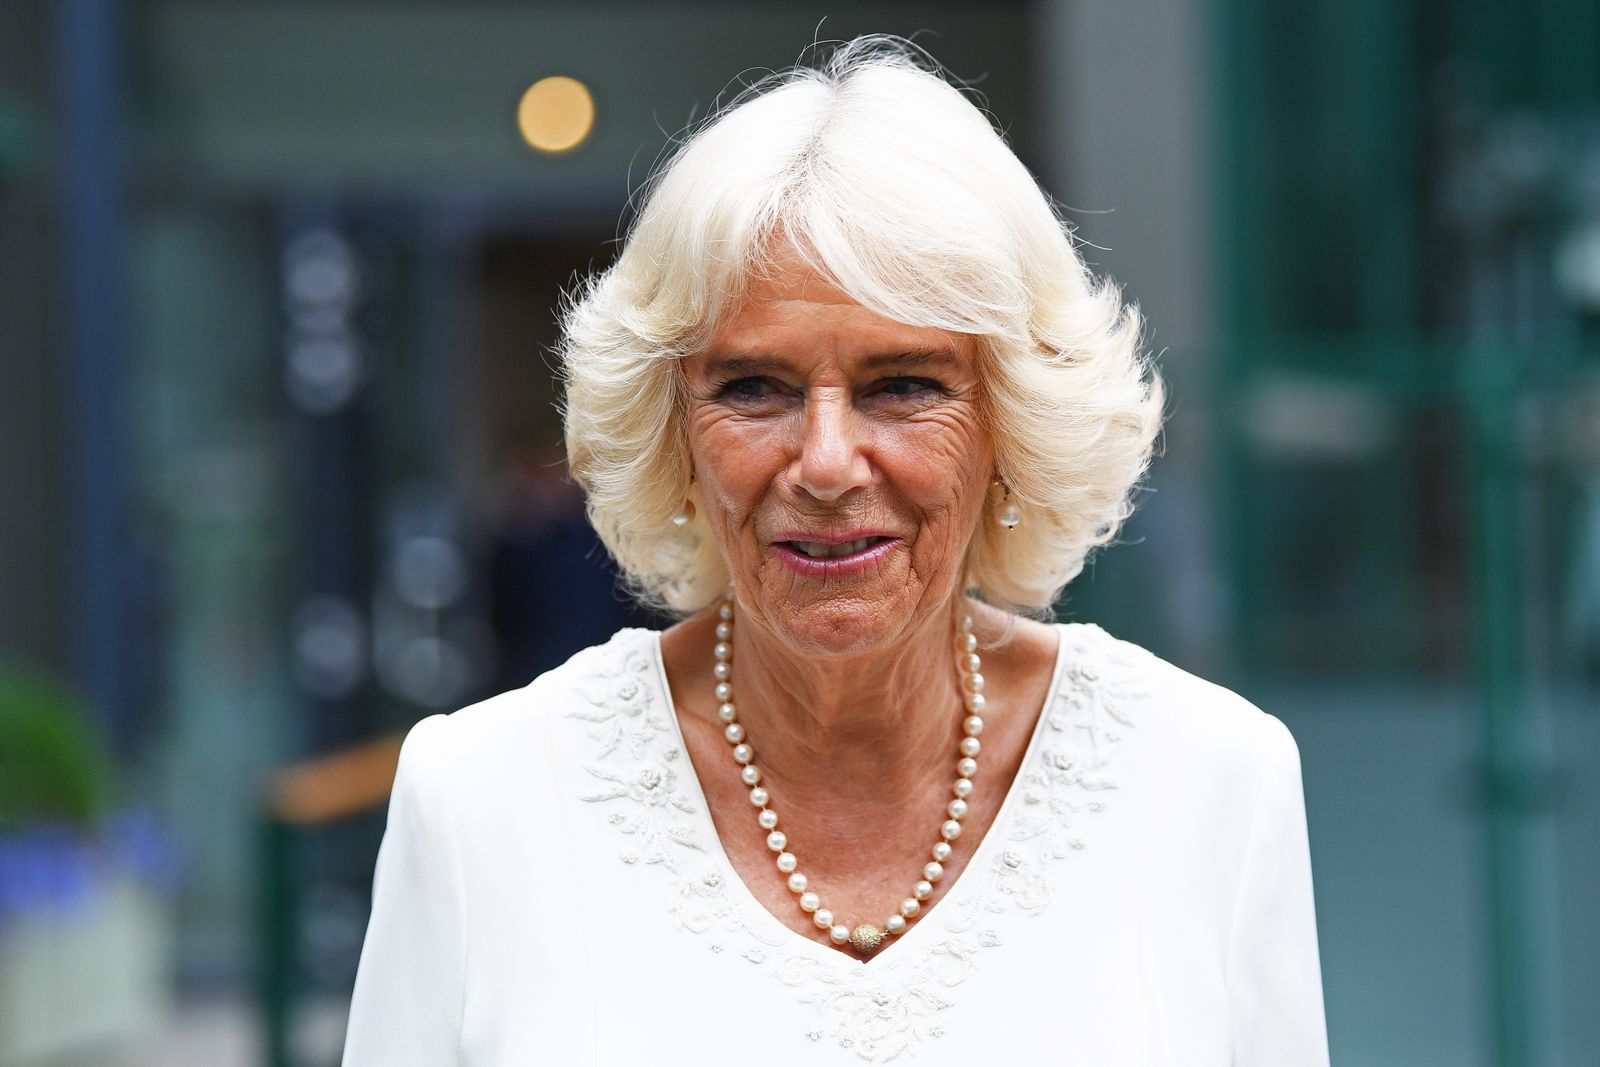 Camilla, Duchess of Cornwall at the All England Lawn Tennis and Croquet Club on July 10, 2019. | Getty Images